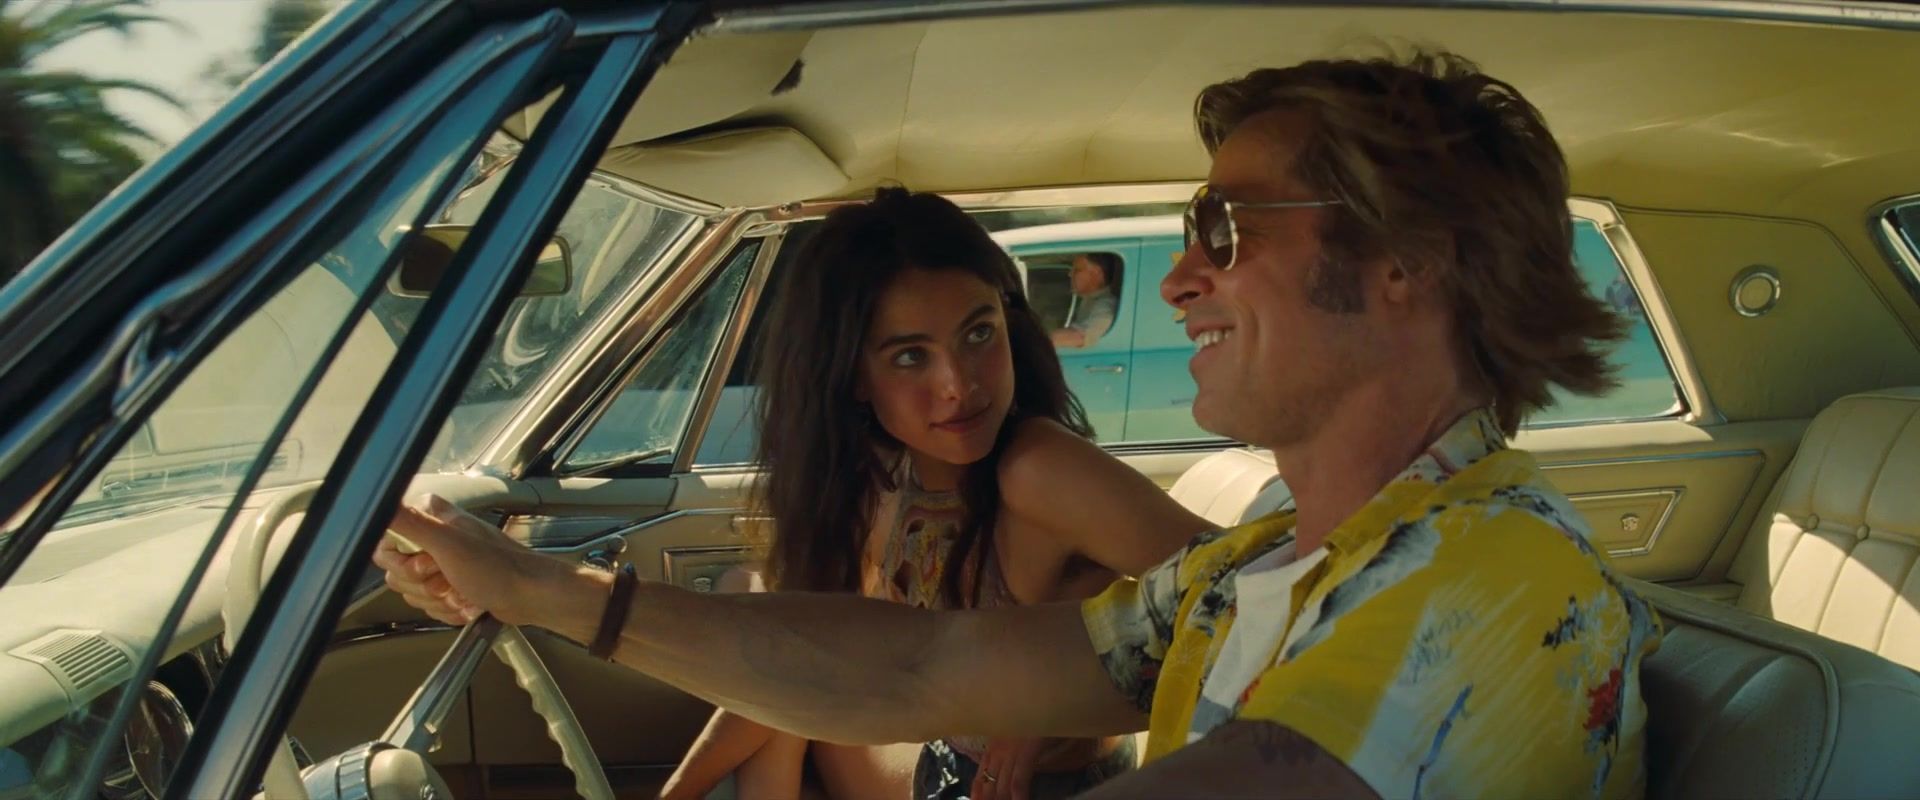 Cunnilingus Sexy Dakota Fanning, Margaret Qualley naked- Once Upon A Time In Hollywood (2019) Carro - 2